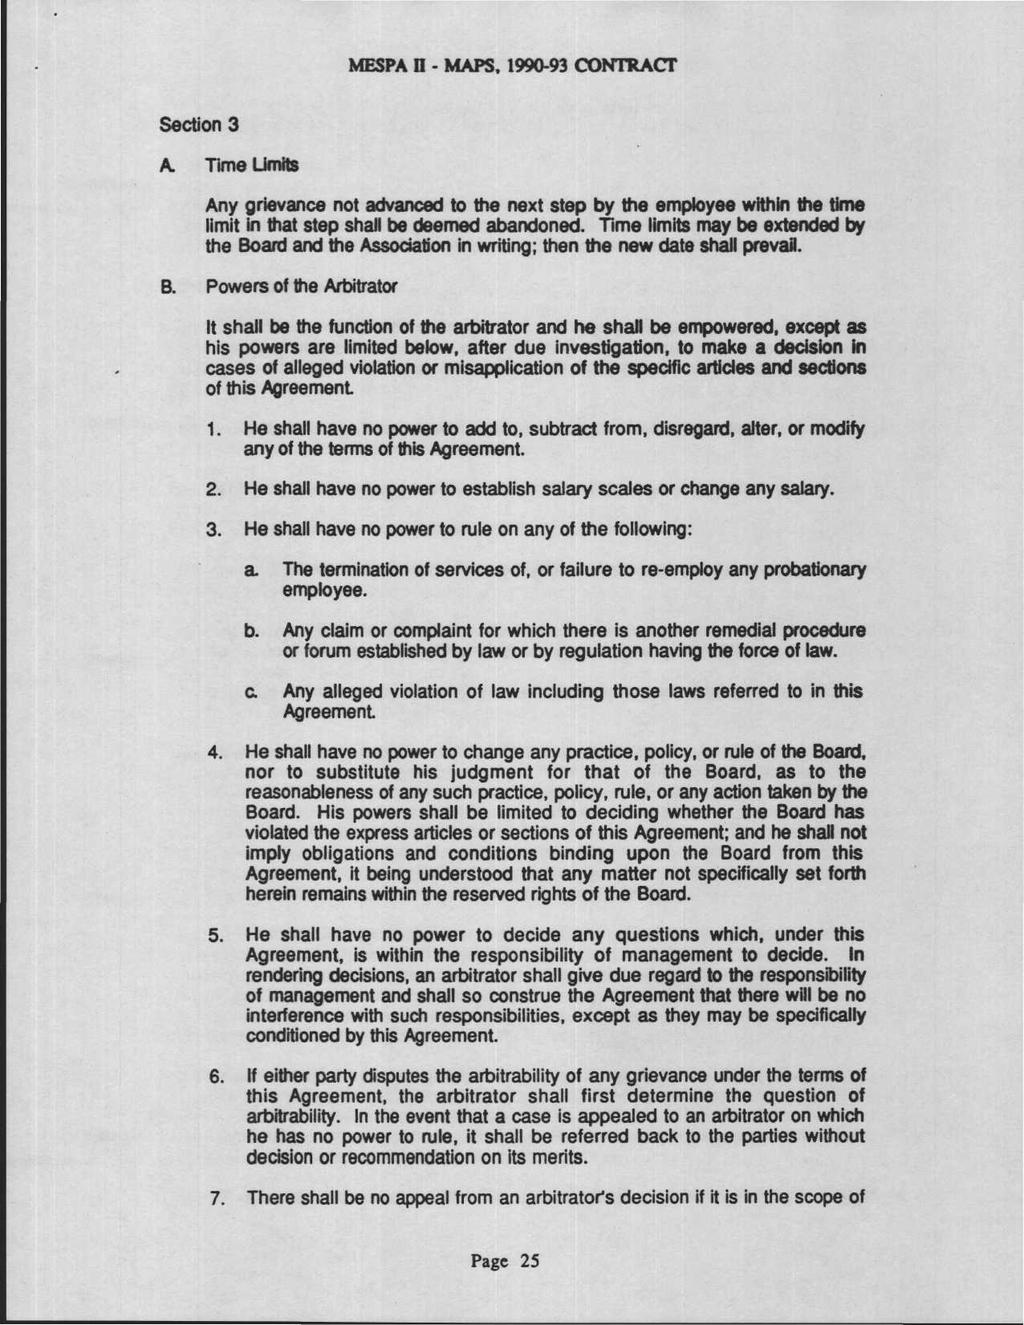 MESPA n - MAPS. 1990-93 CONTRACT Section 3 A. TimeUmits Any grievance not advanced to the next step by the employee within the time limit in that step shall be deemed abandoned.